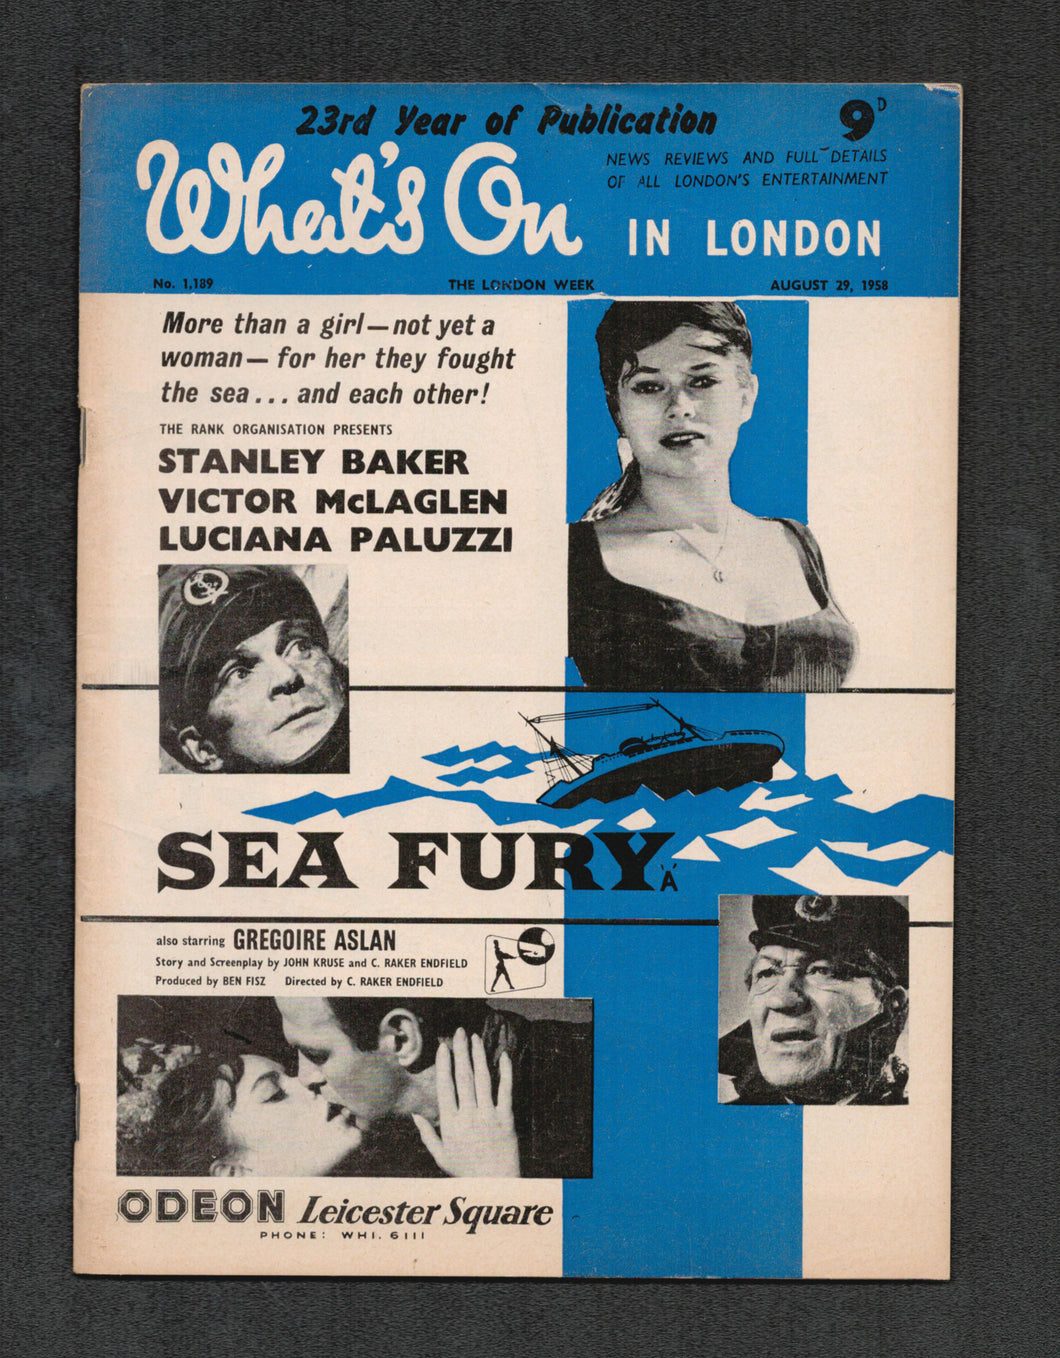 Whats On No 1189 Aug 29 1958